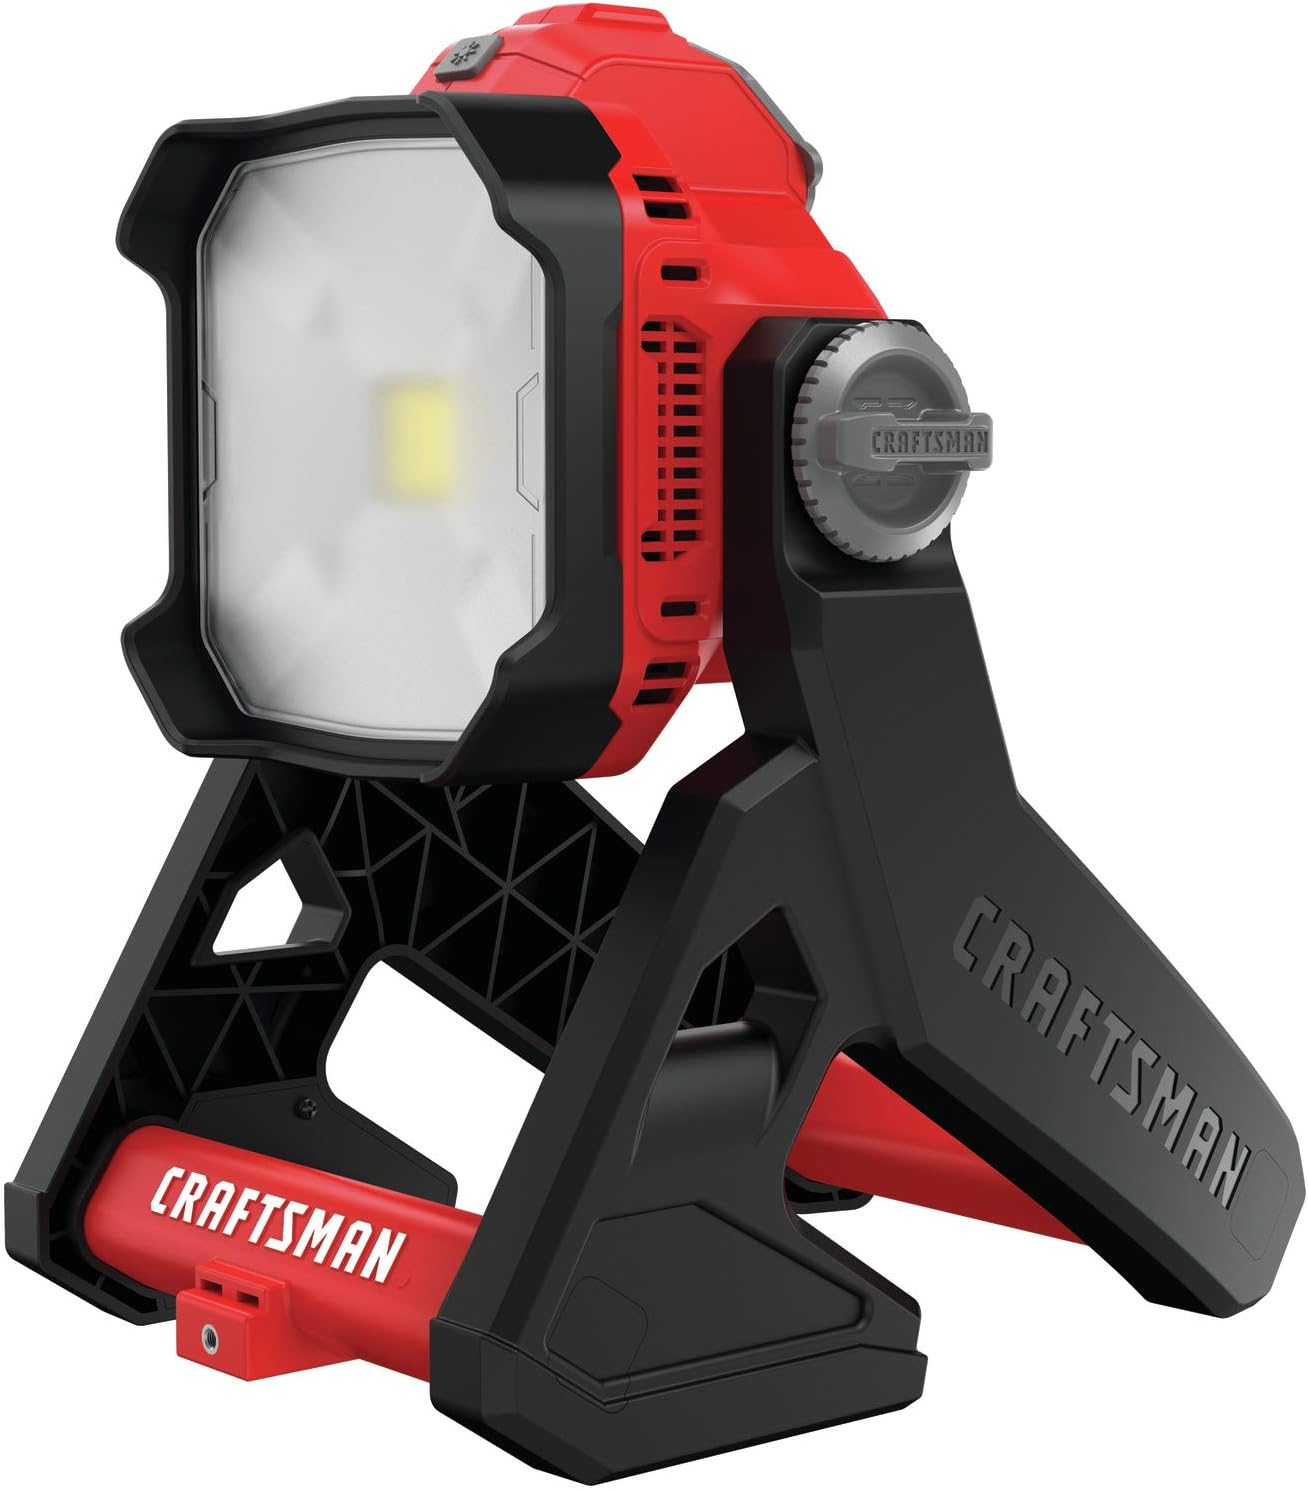 Craftsman V20 LED Work Light, Small Area, Tool Only (CMCL030B)